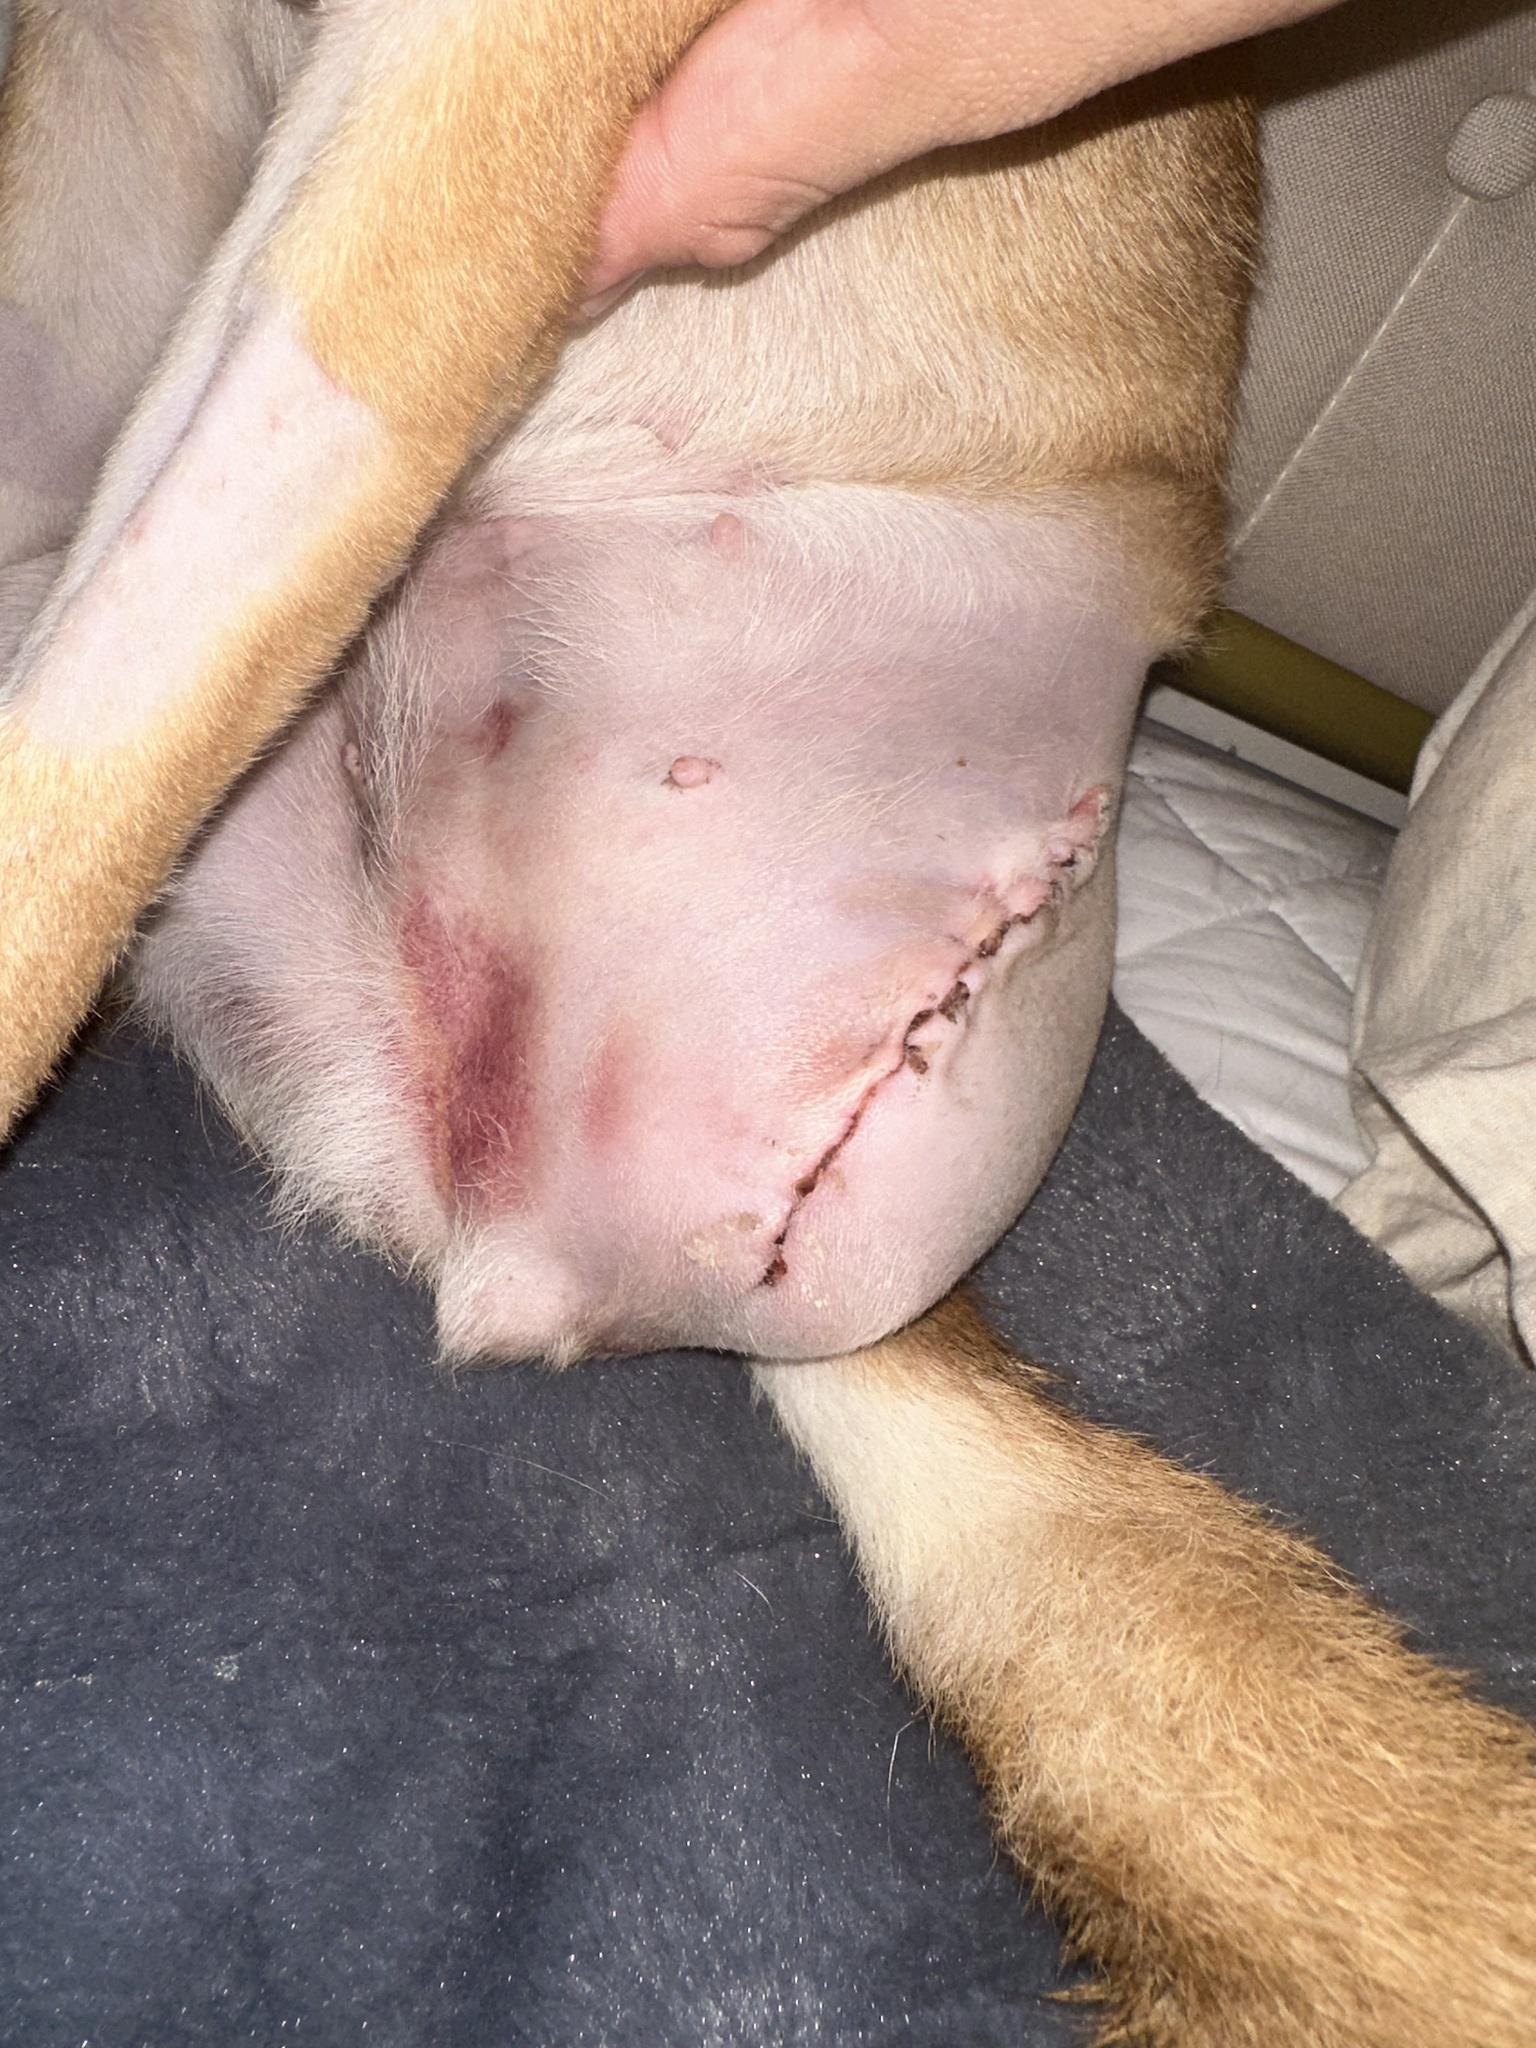 Willow Immediate Post-Op Dog Amputation Bruise